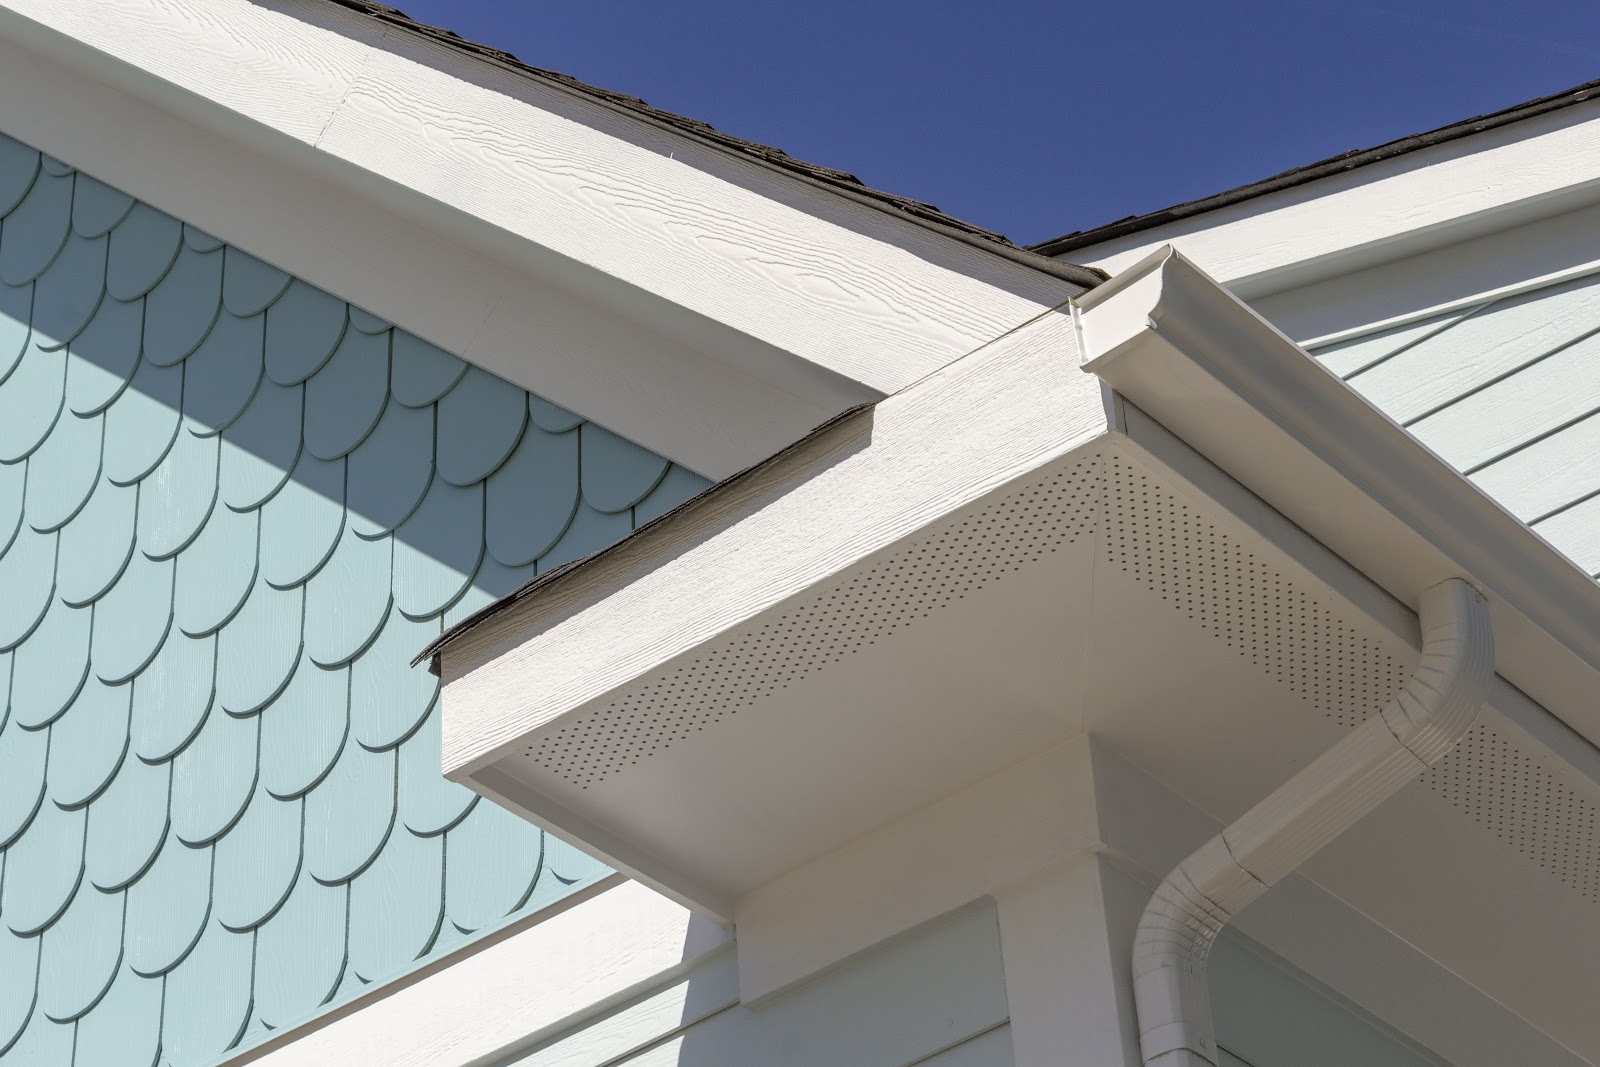 What Are Soffits And Eaves?